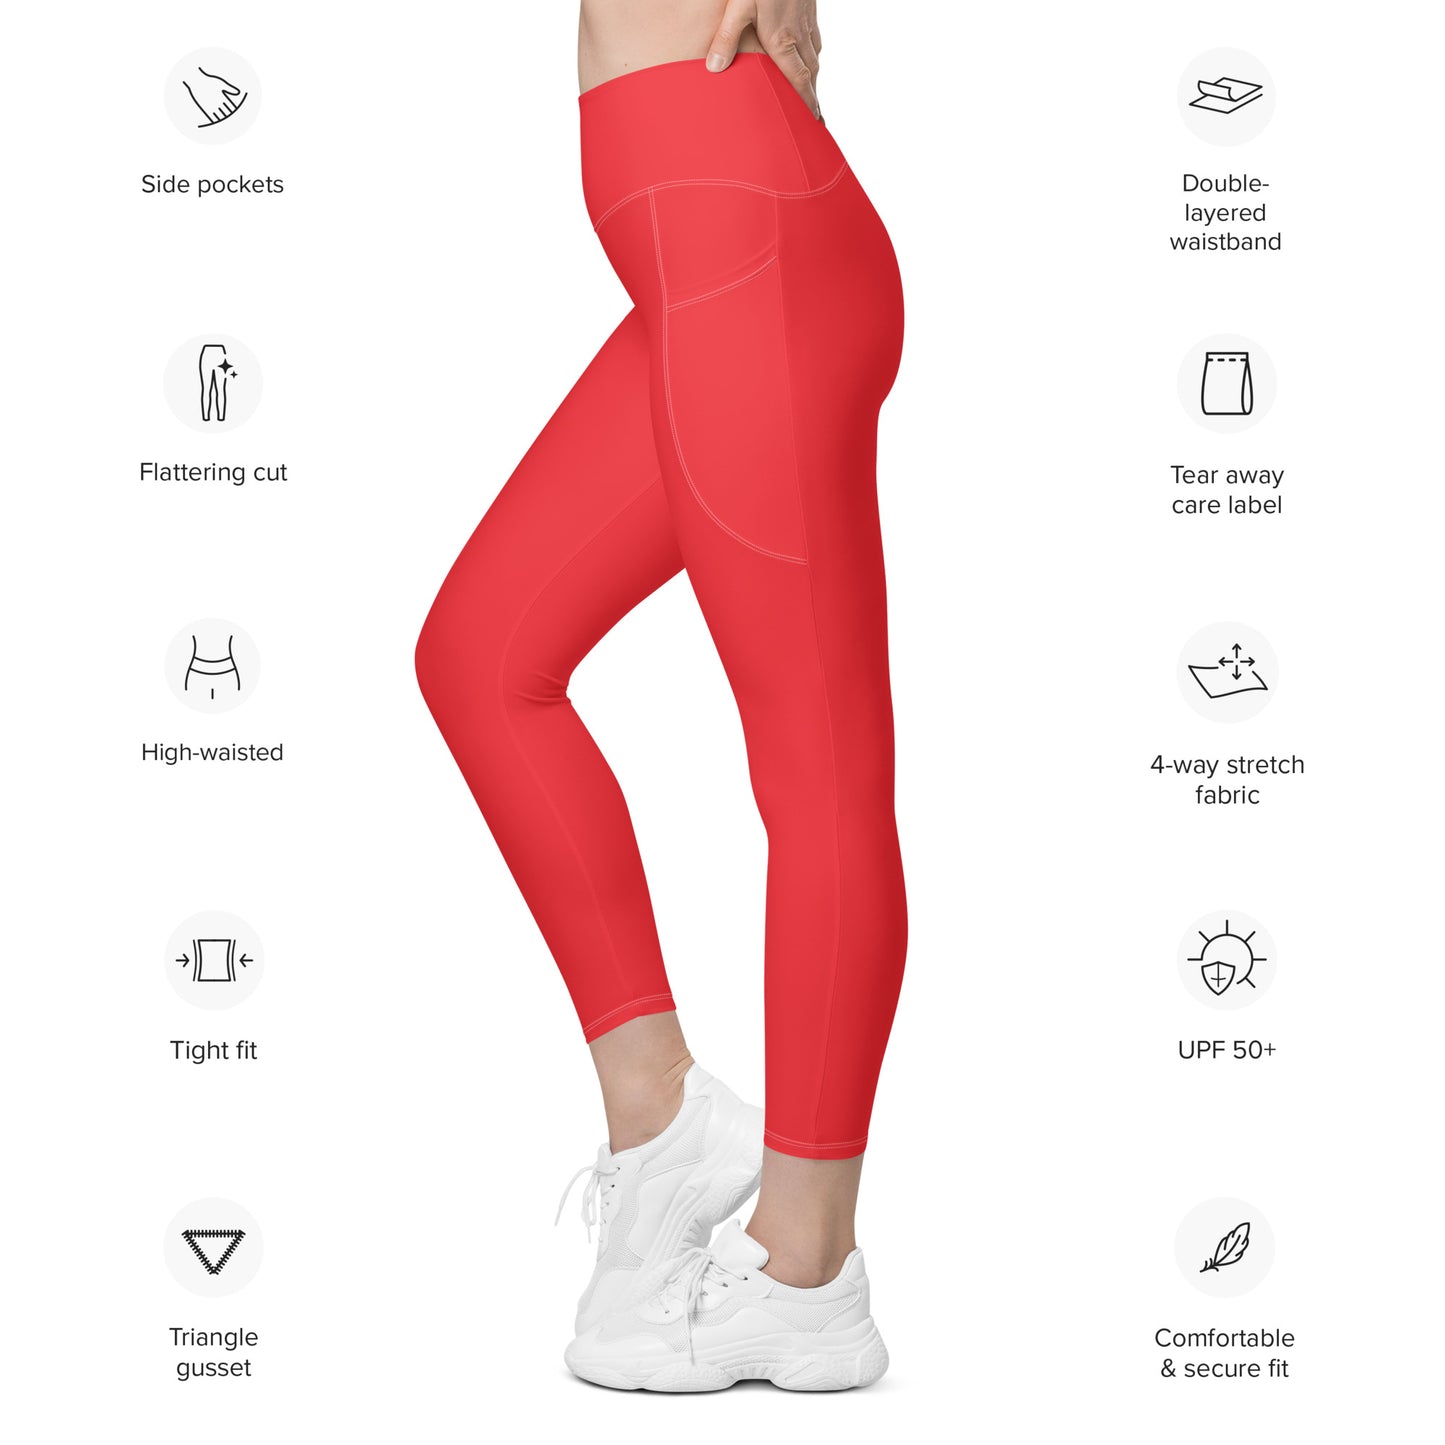 Nord Solid Red High Waist 7/8 Recycled Yoga Leggings / Yoga Pants with Pockets